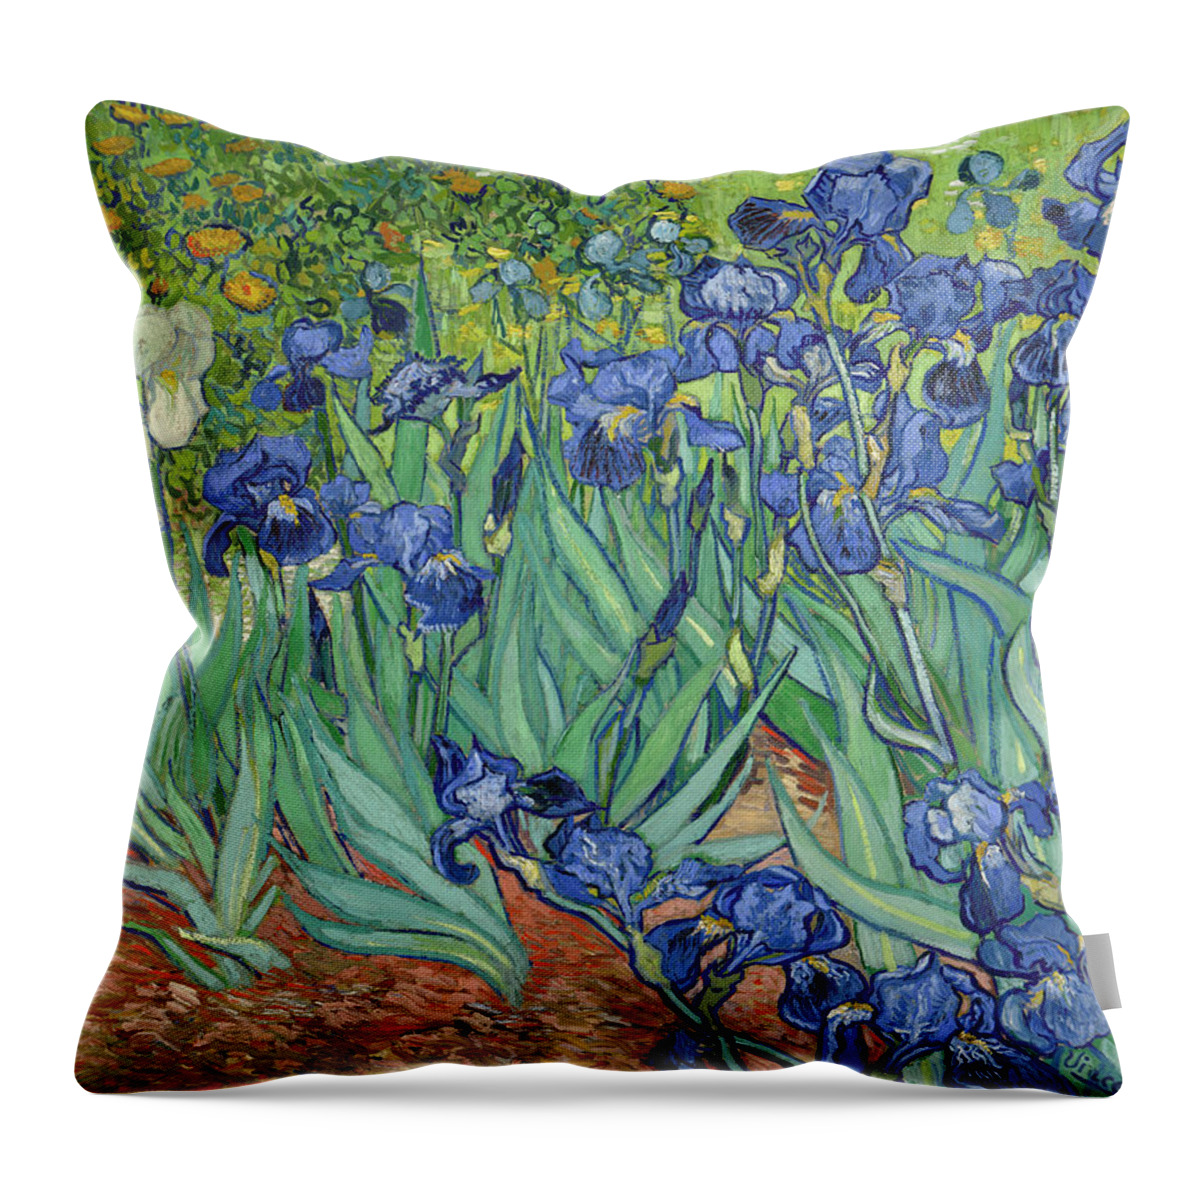 Irises Throw Pillow featuring the painting Irises by Vincent van Gogh